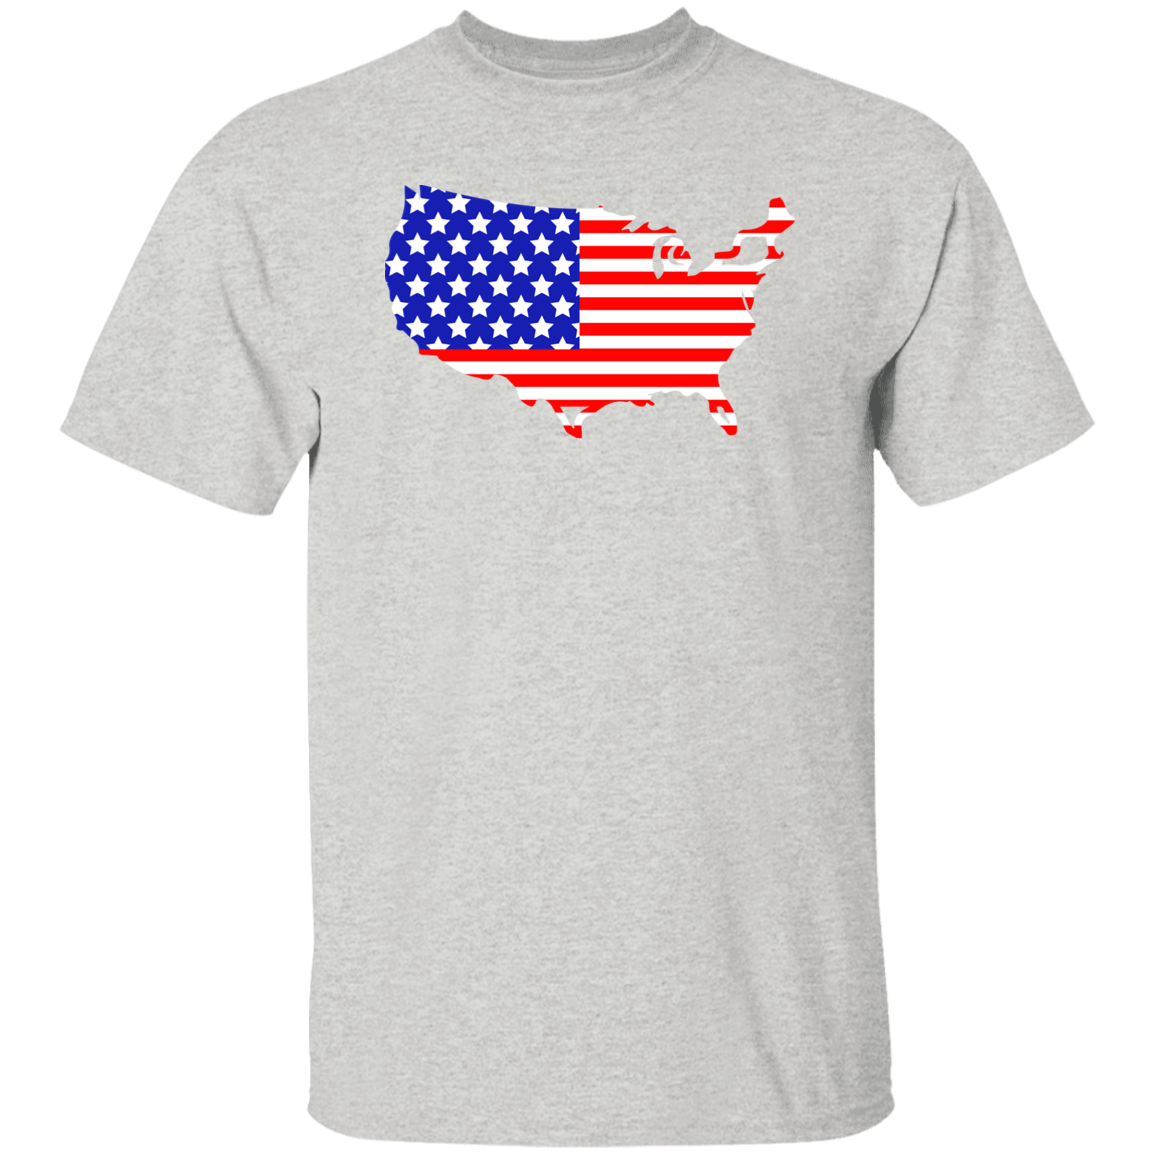 US map, American Flag T-Shirt, Patriotic 4th of July Tee Shirt for Independence Day, USA Shirt, Red White and Blue Shirt